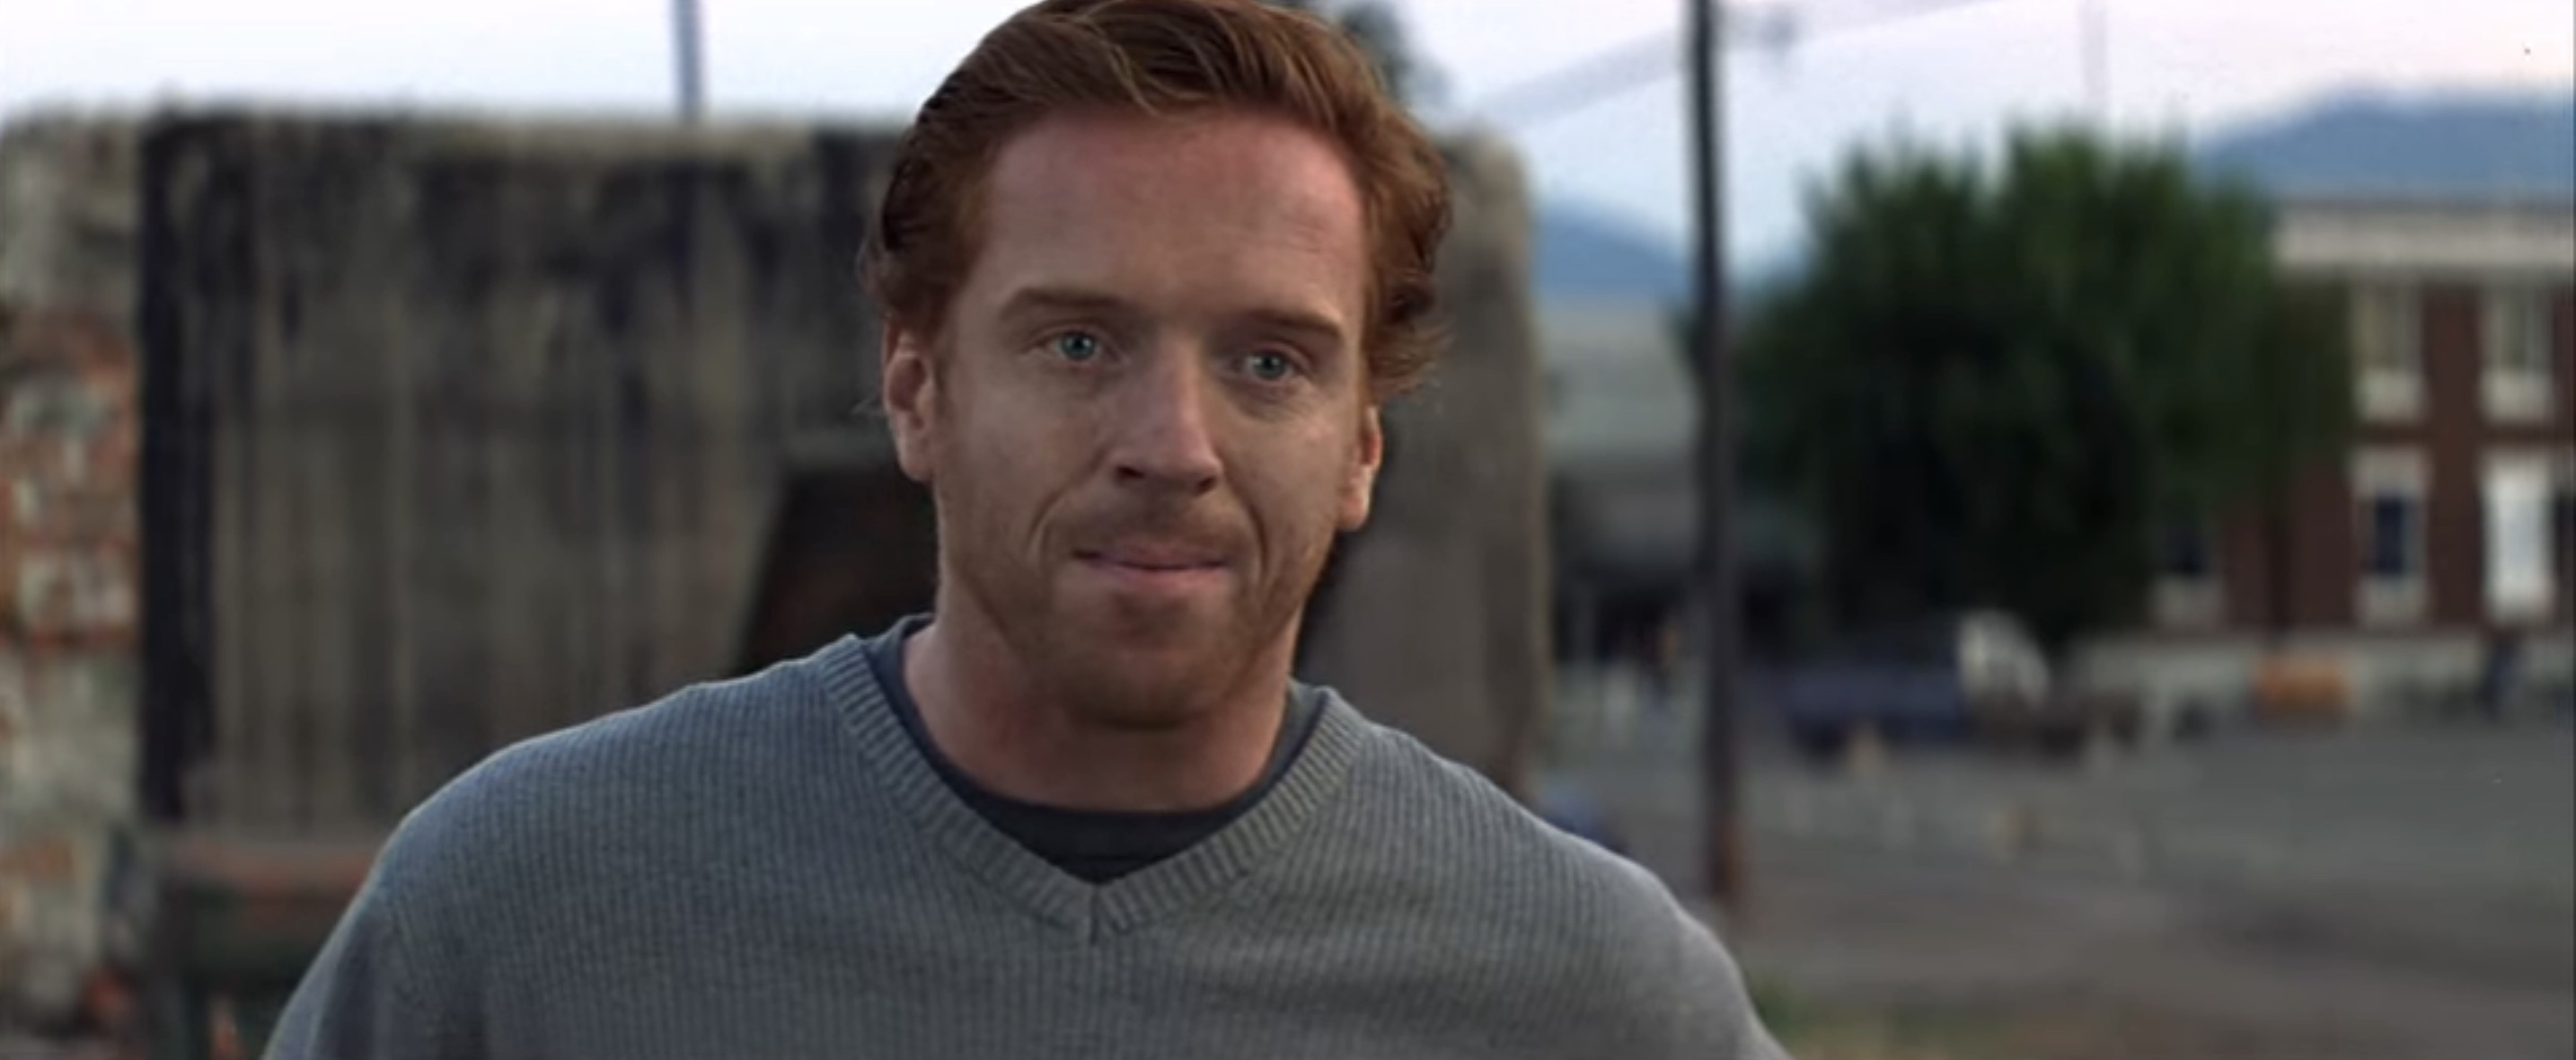 An Unfinished Life Cast - Damian Lewis as Gary Winston